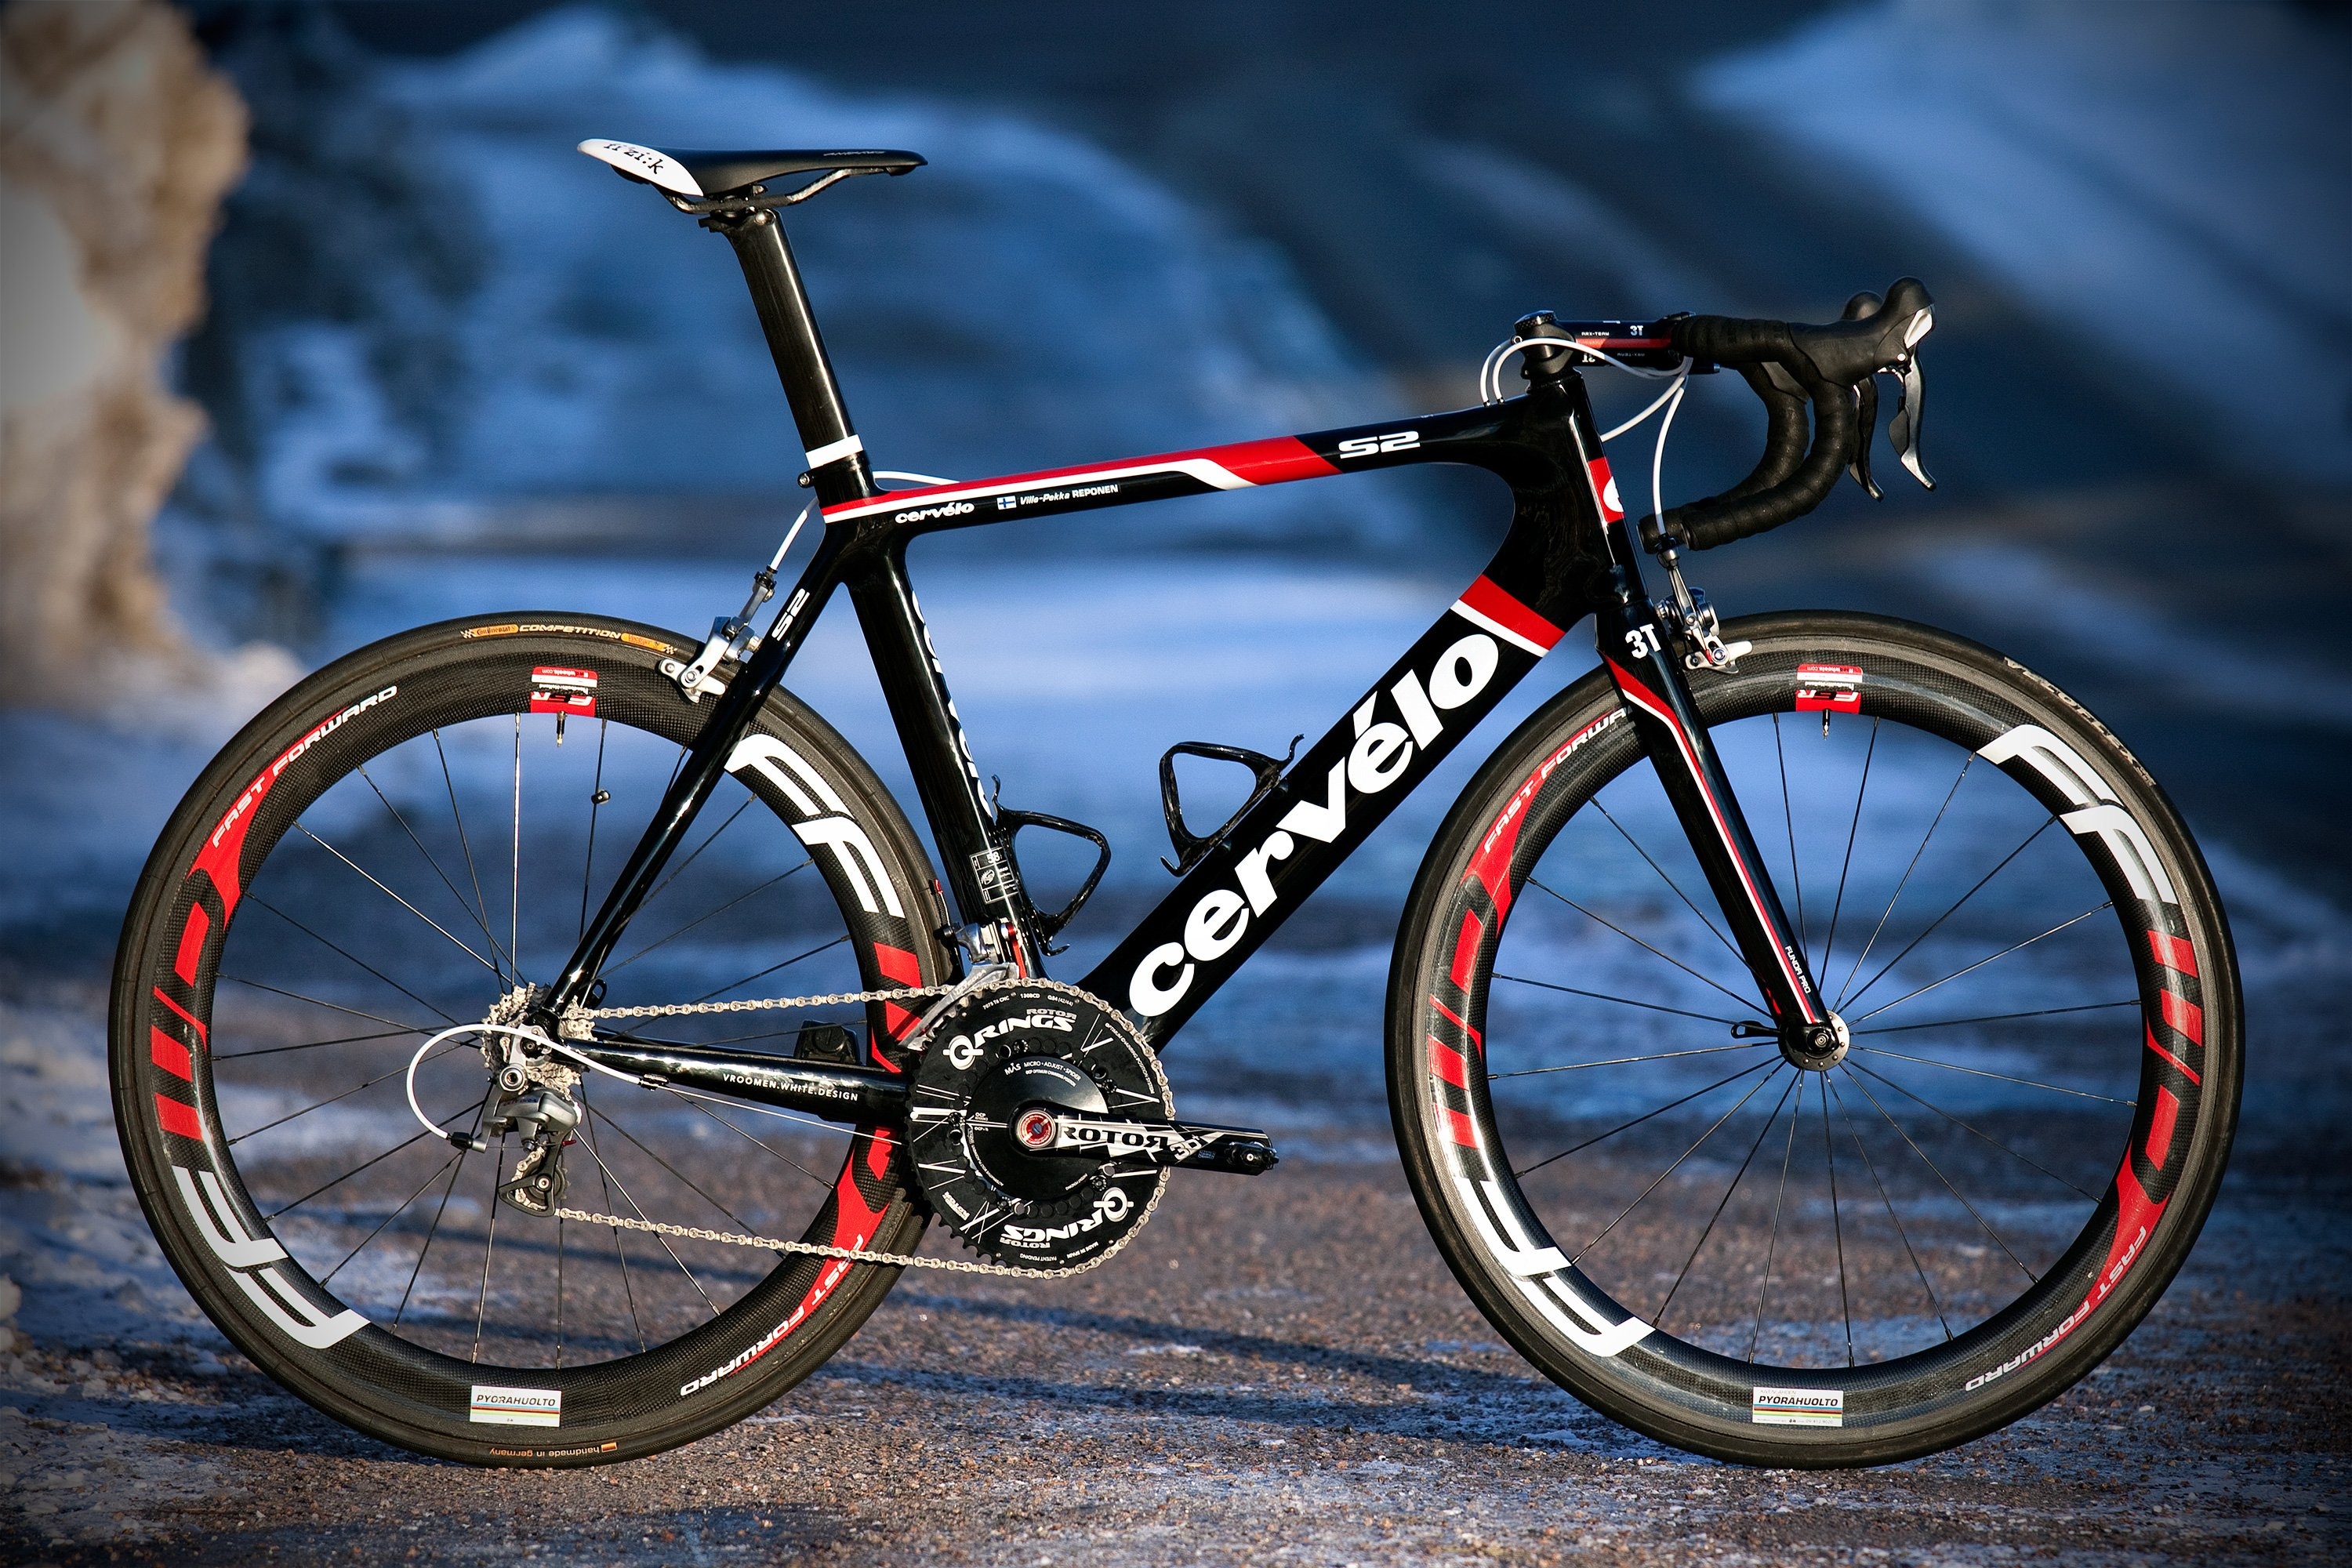 Cervelo Bikes, Bicycle wallpaper, High-quality image, Cycling enthusiasts, 3000x2000 HD Desktop